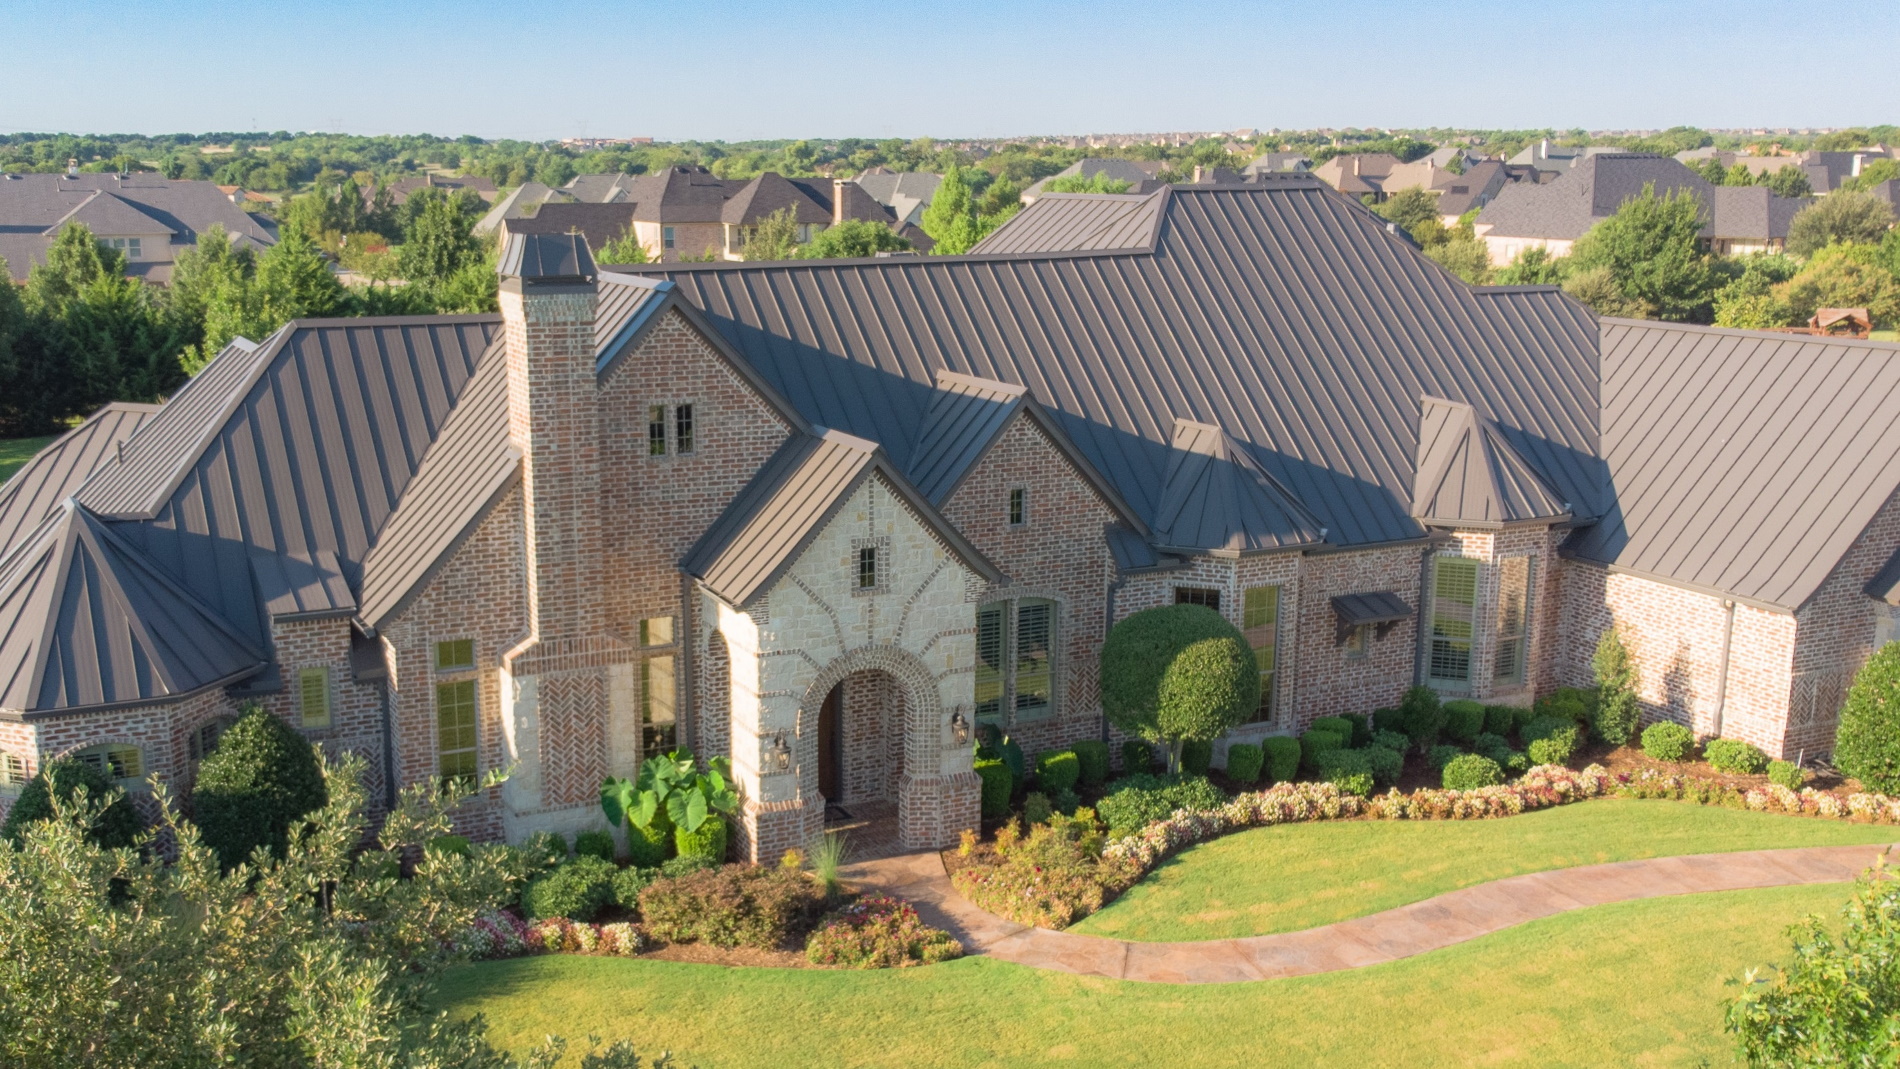 Roofer chooses McElroy Metal system for his own Texas home